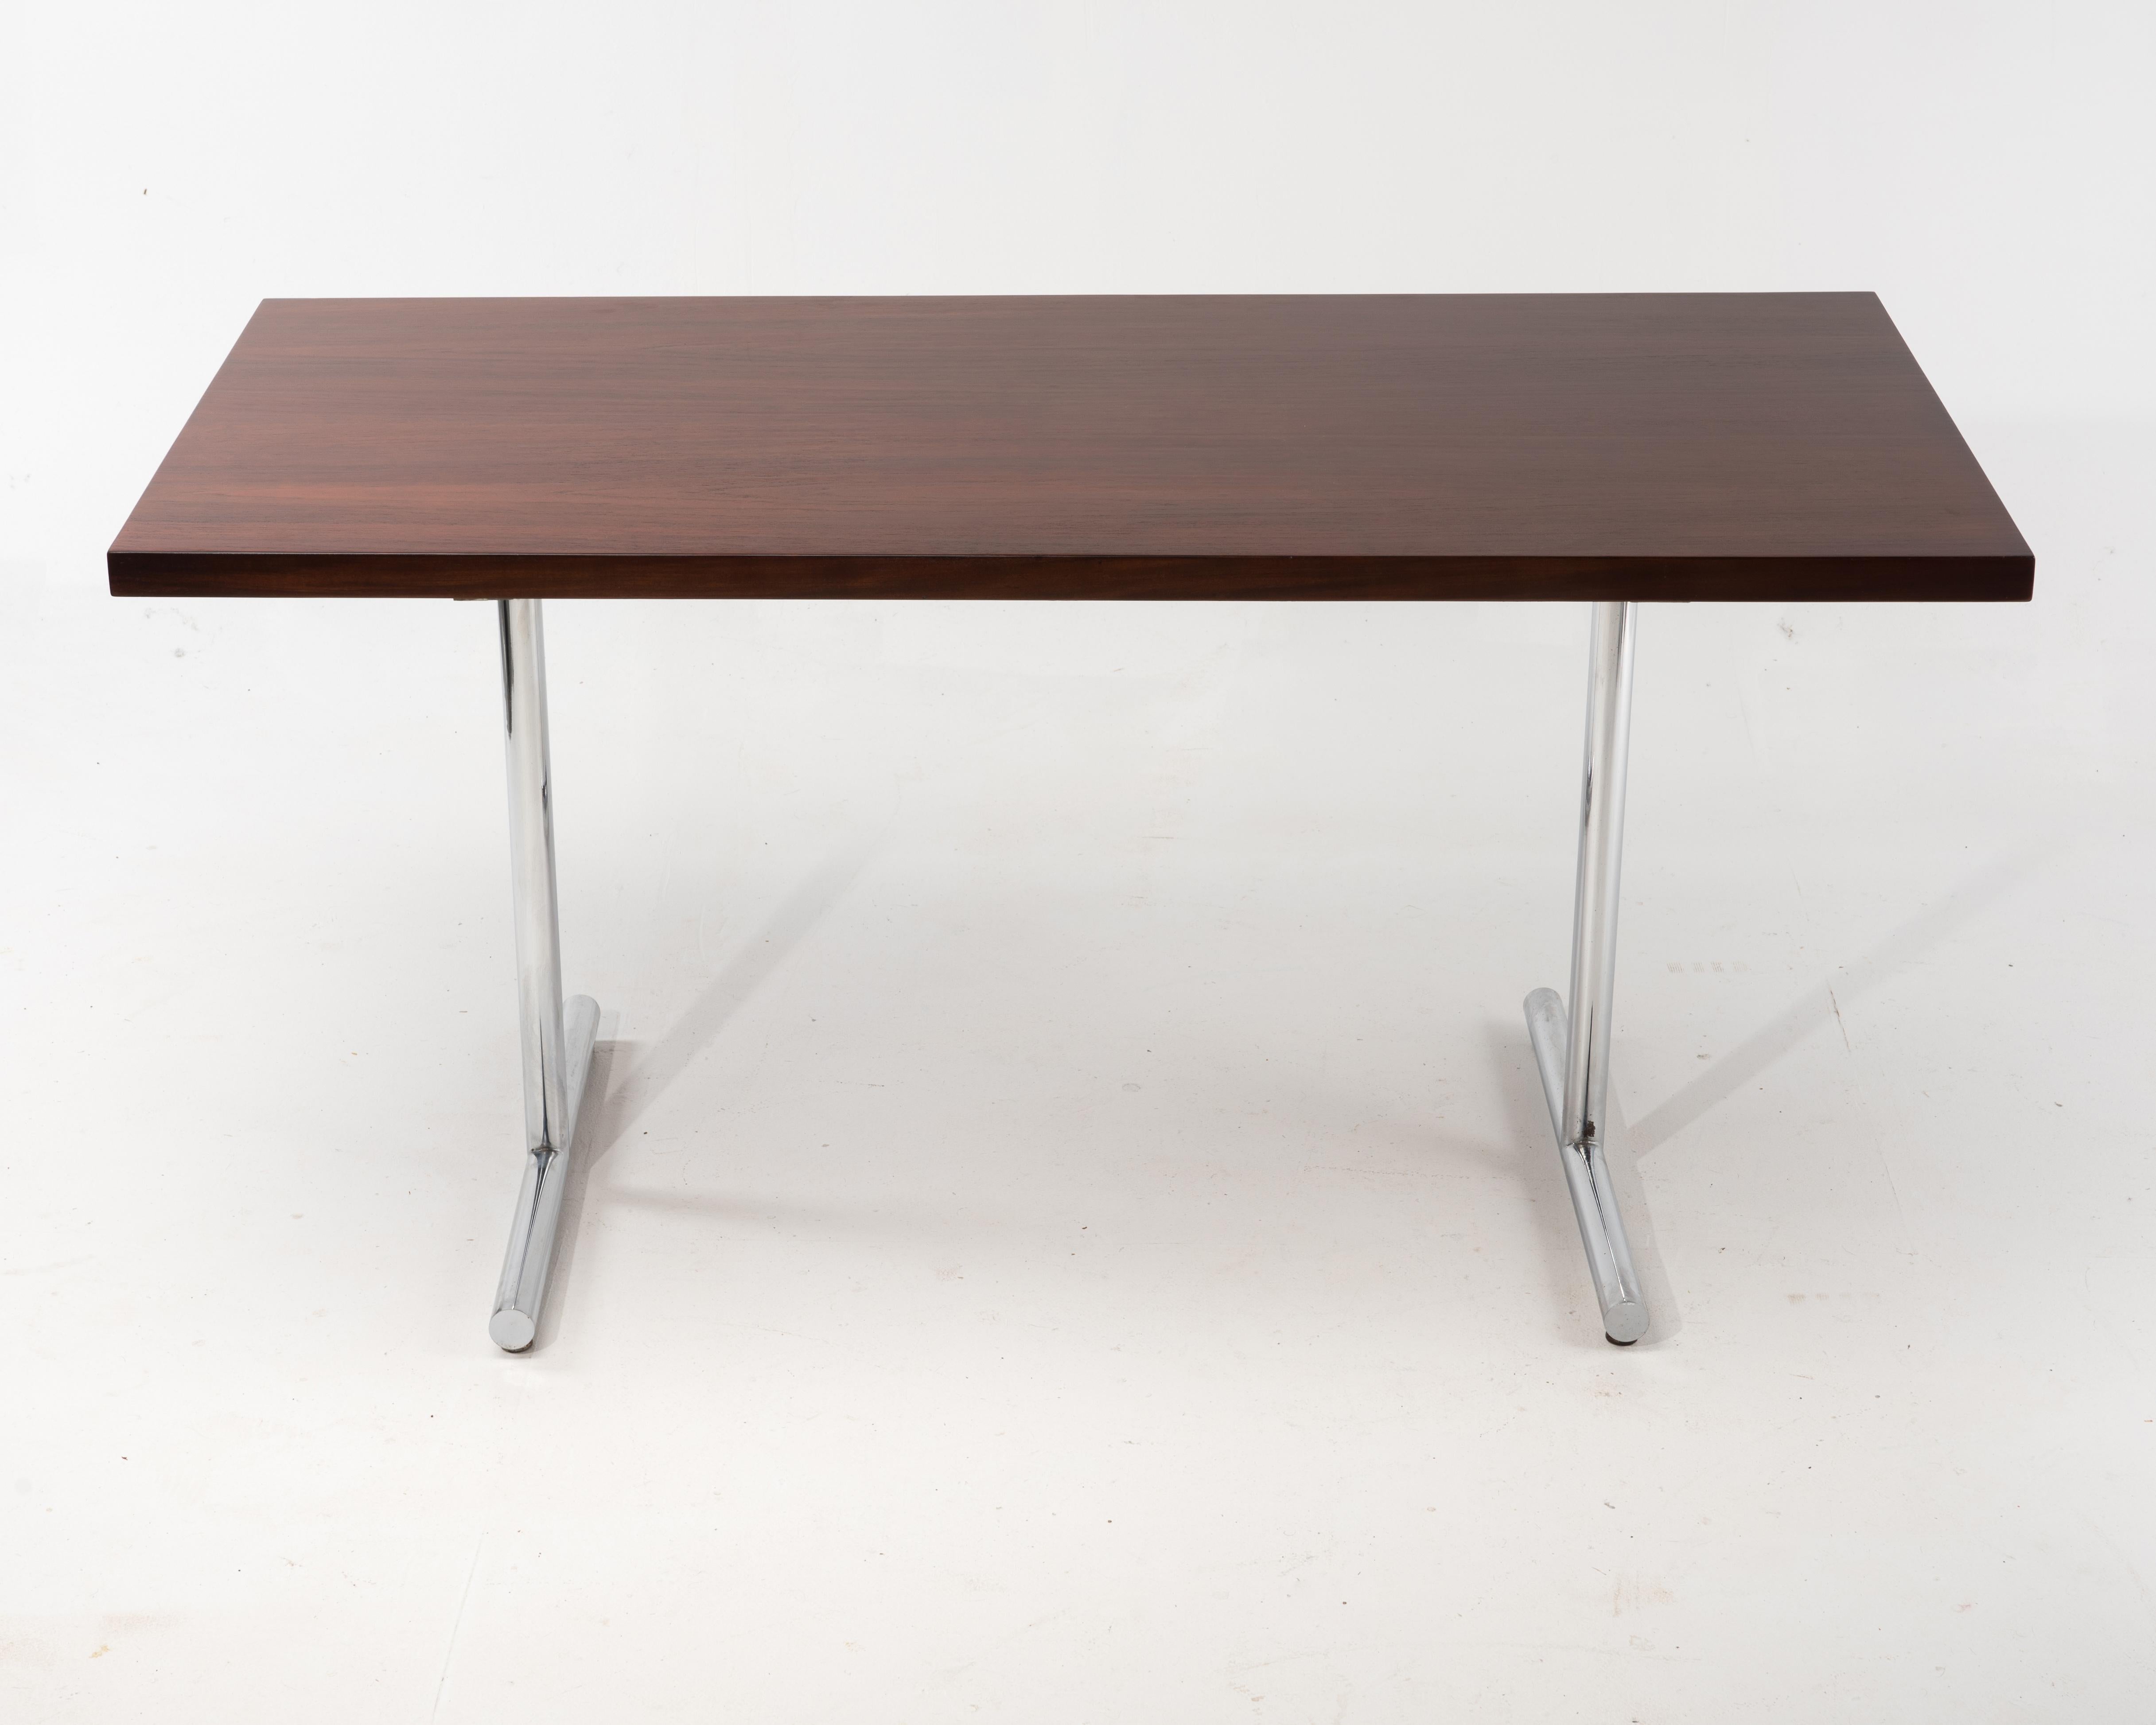 American 1970s Mid-Century Modern Rosewood Chrome Desk Dining Working Table